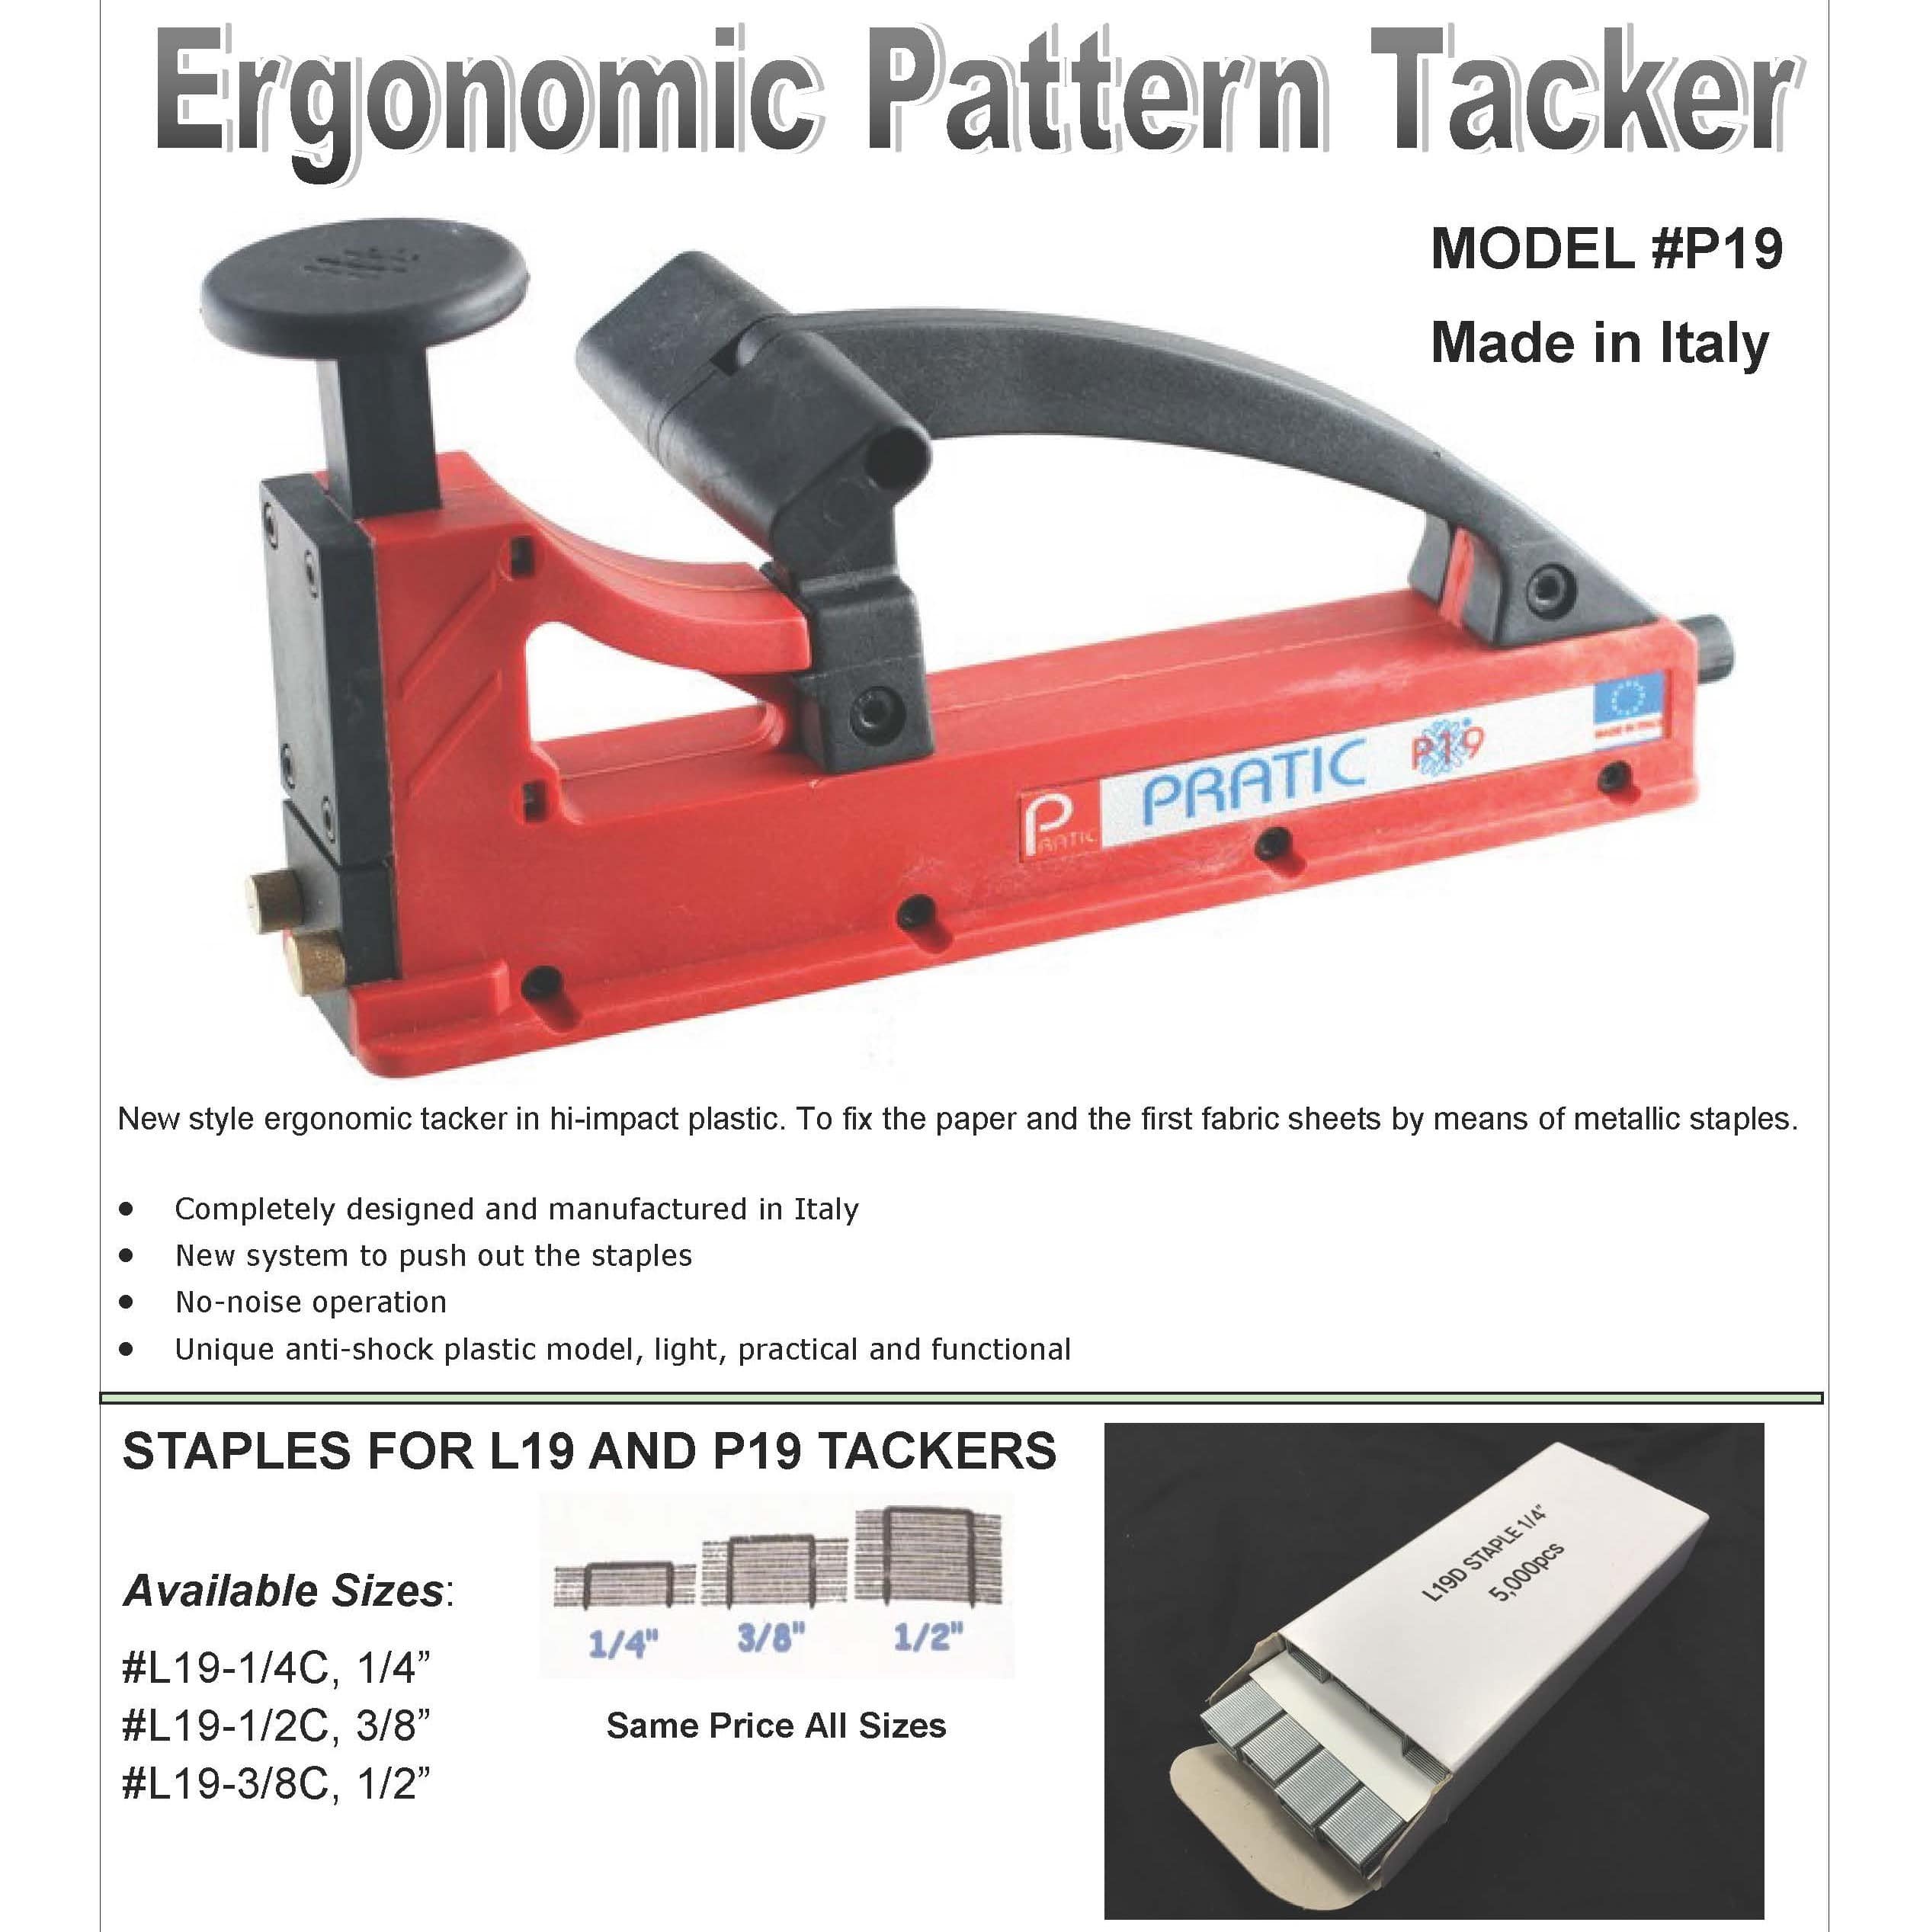 P19 ERGONOMIC PATTERN TACKER
STAPLES FOR P19 and L19